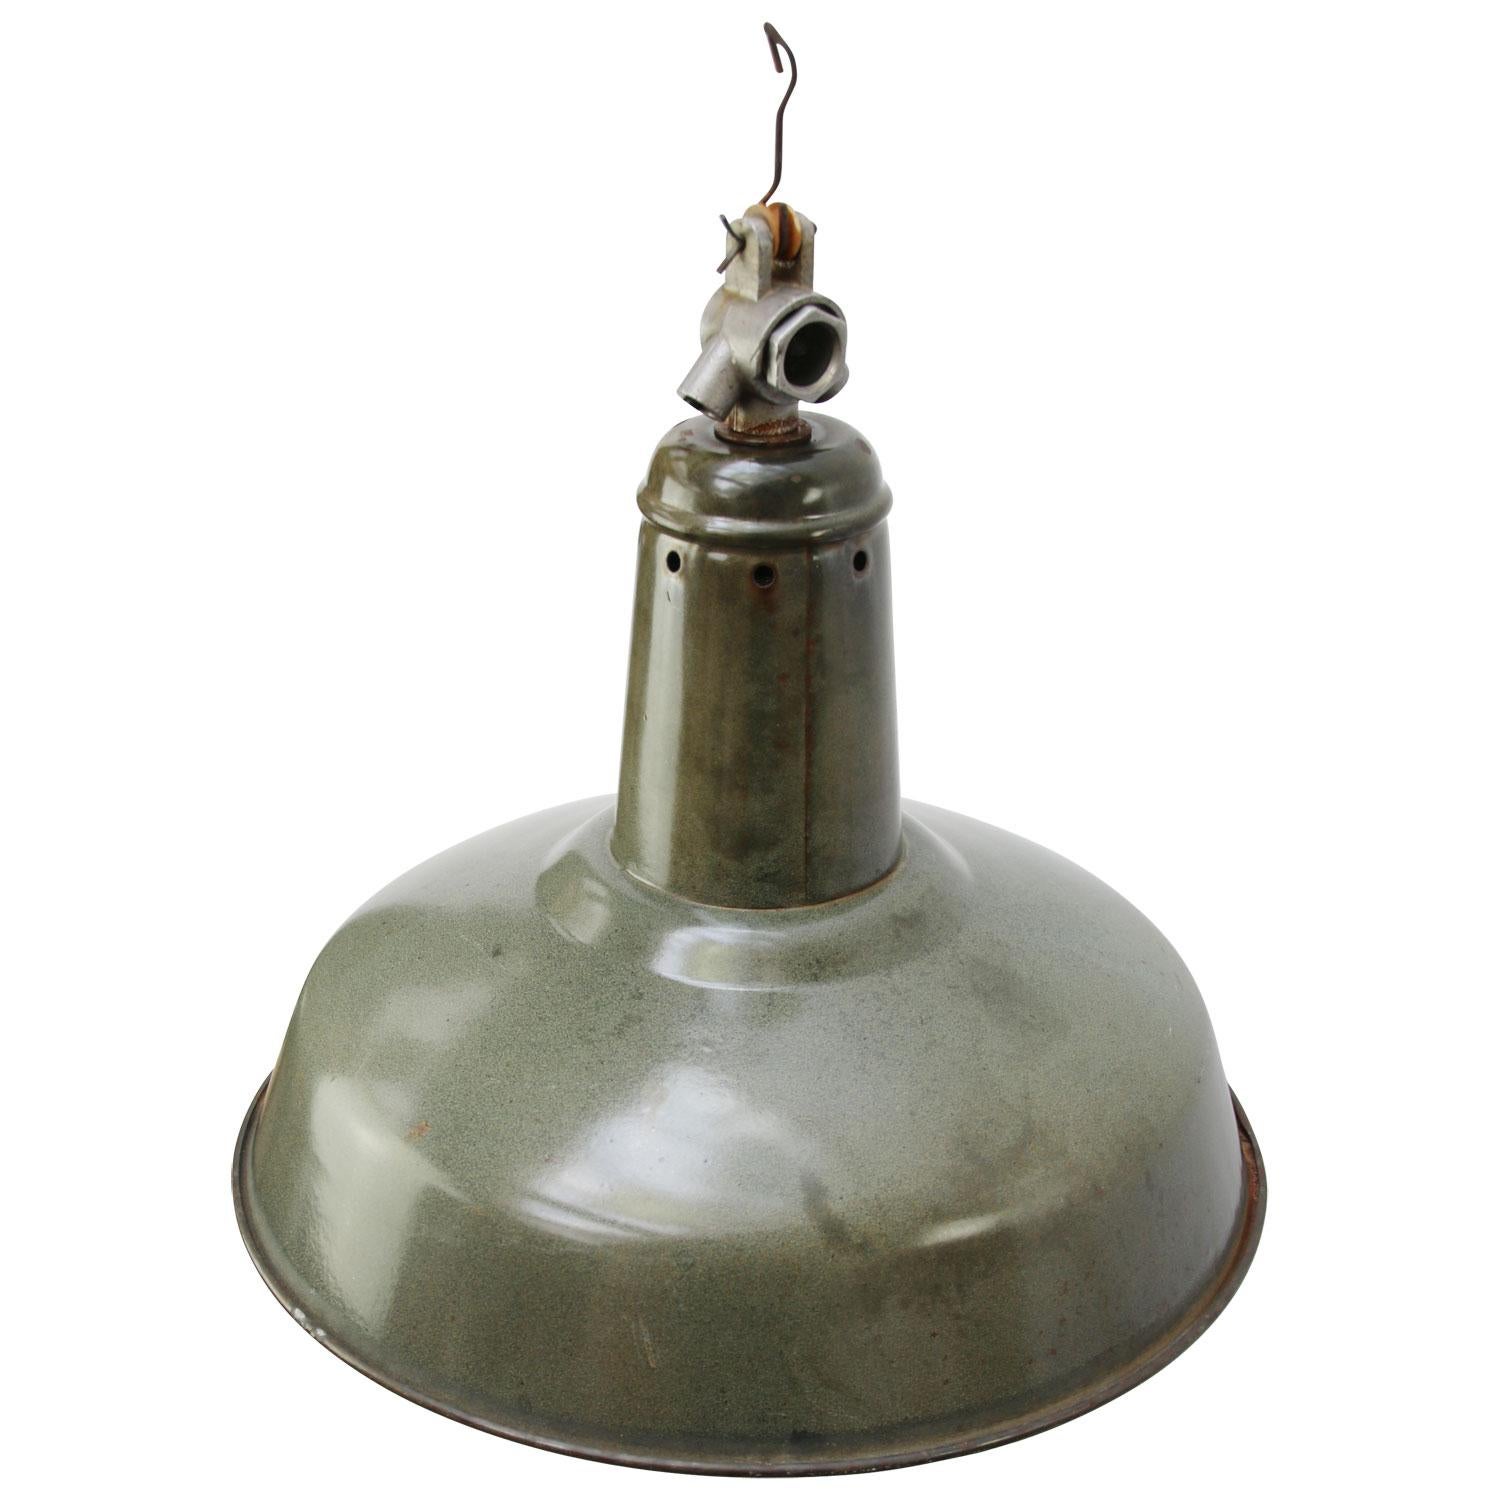 Industrial factory pendant
Green / grey enamel, white interior

Weight: 1.50 kg / 3.3 lb

Priced per individual item. All lamps have been made suitable by international standards for incandescent light bulbs, energy-efficient and LED bulbs.